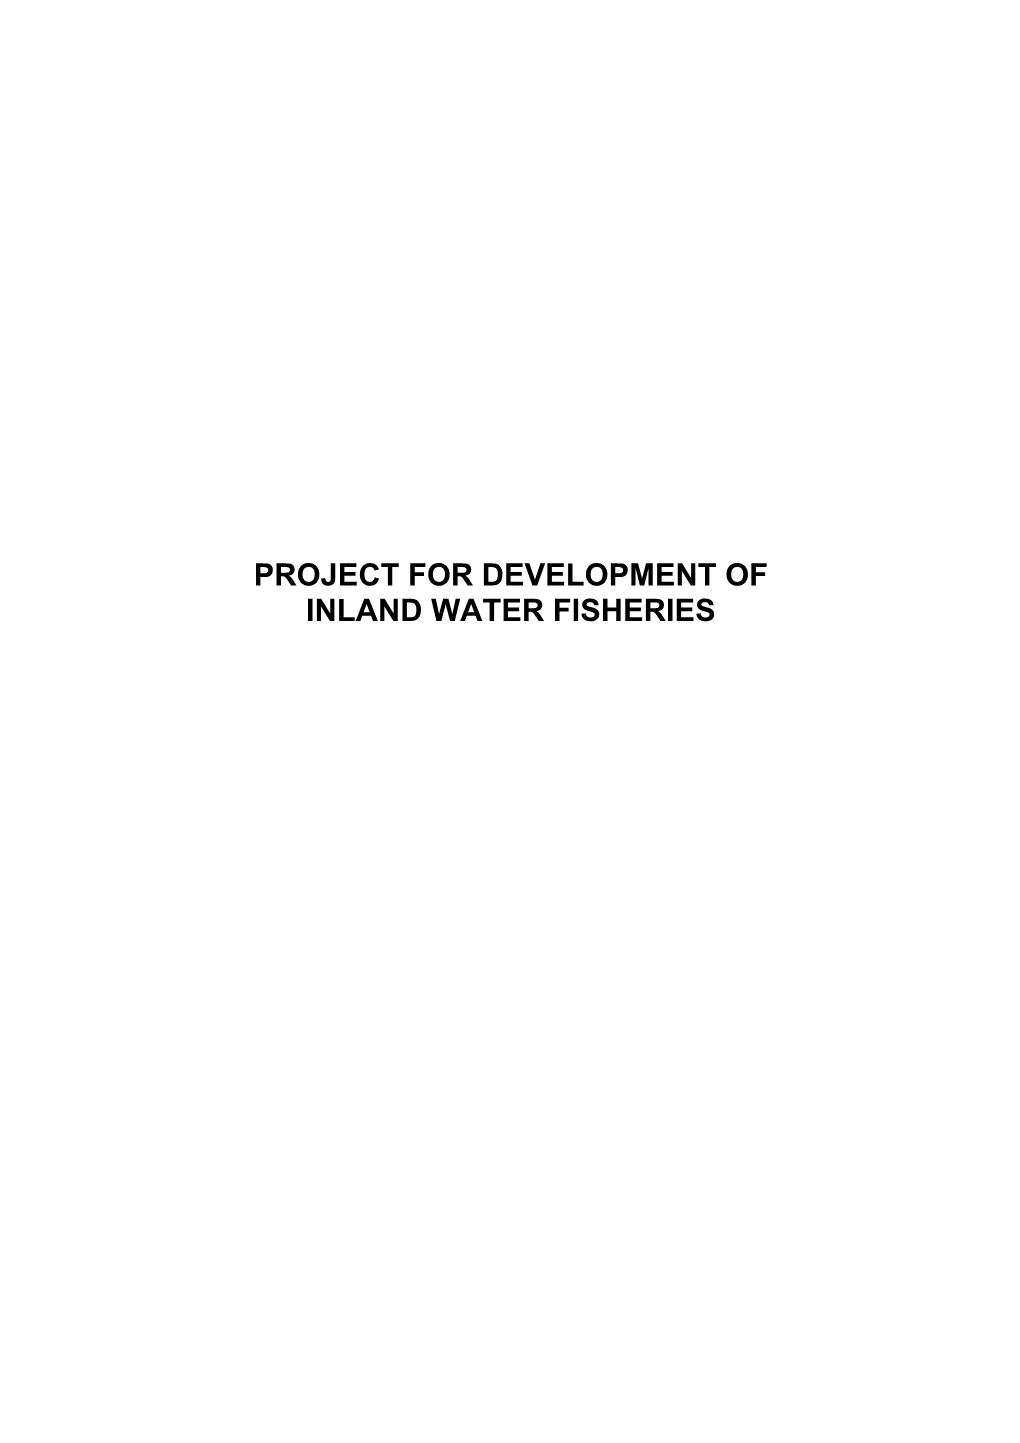 PROJECT for DEVELOPMENT of INLAND WATER FISHERIES 5-7 Project for Development of Inland Water Fisheries